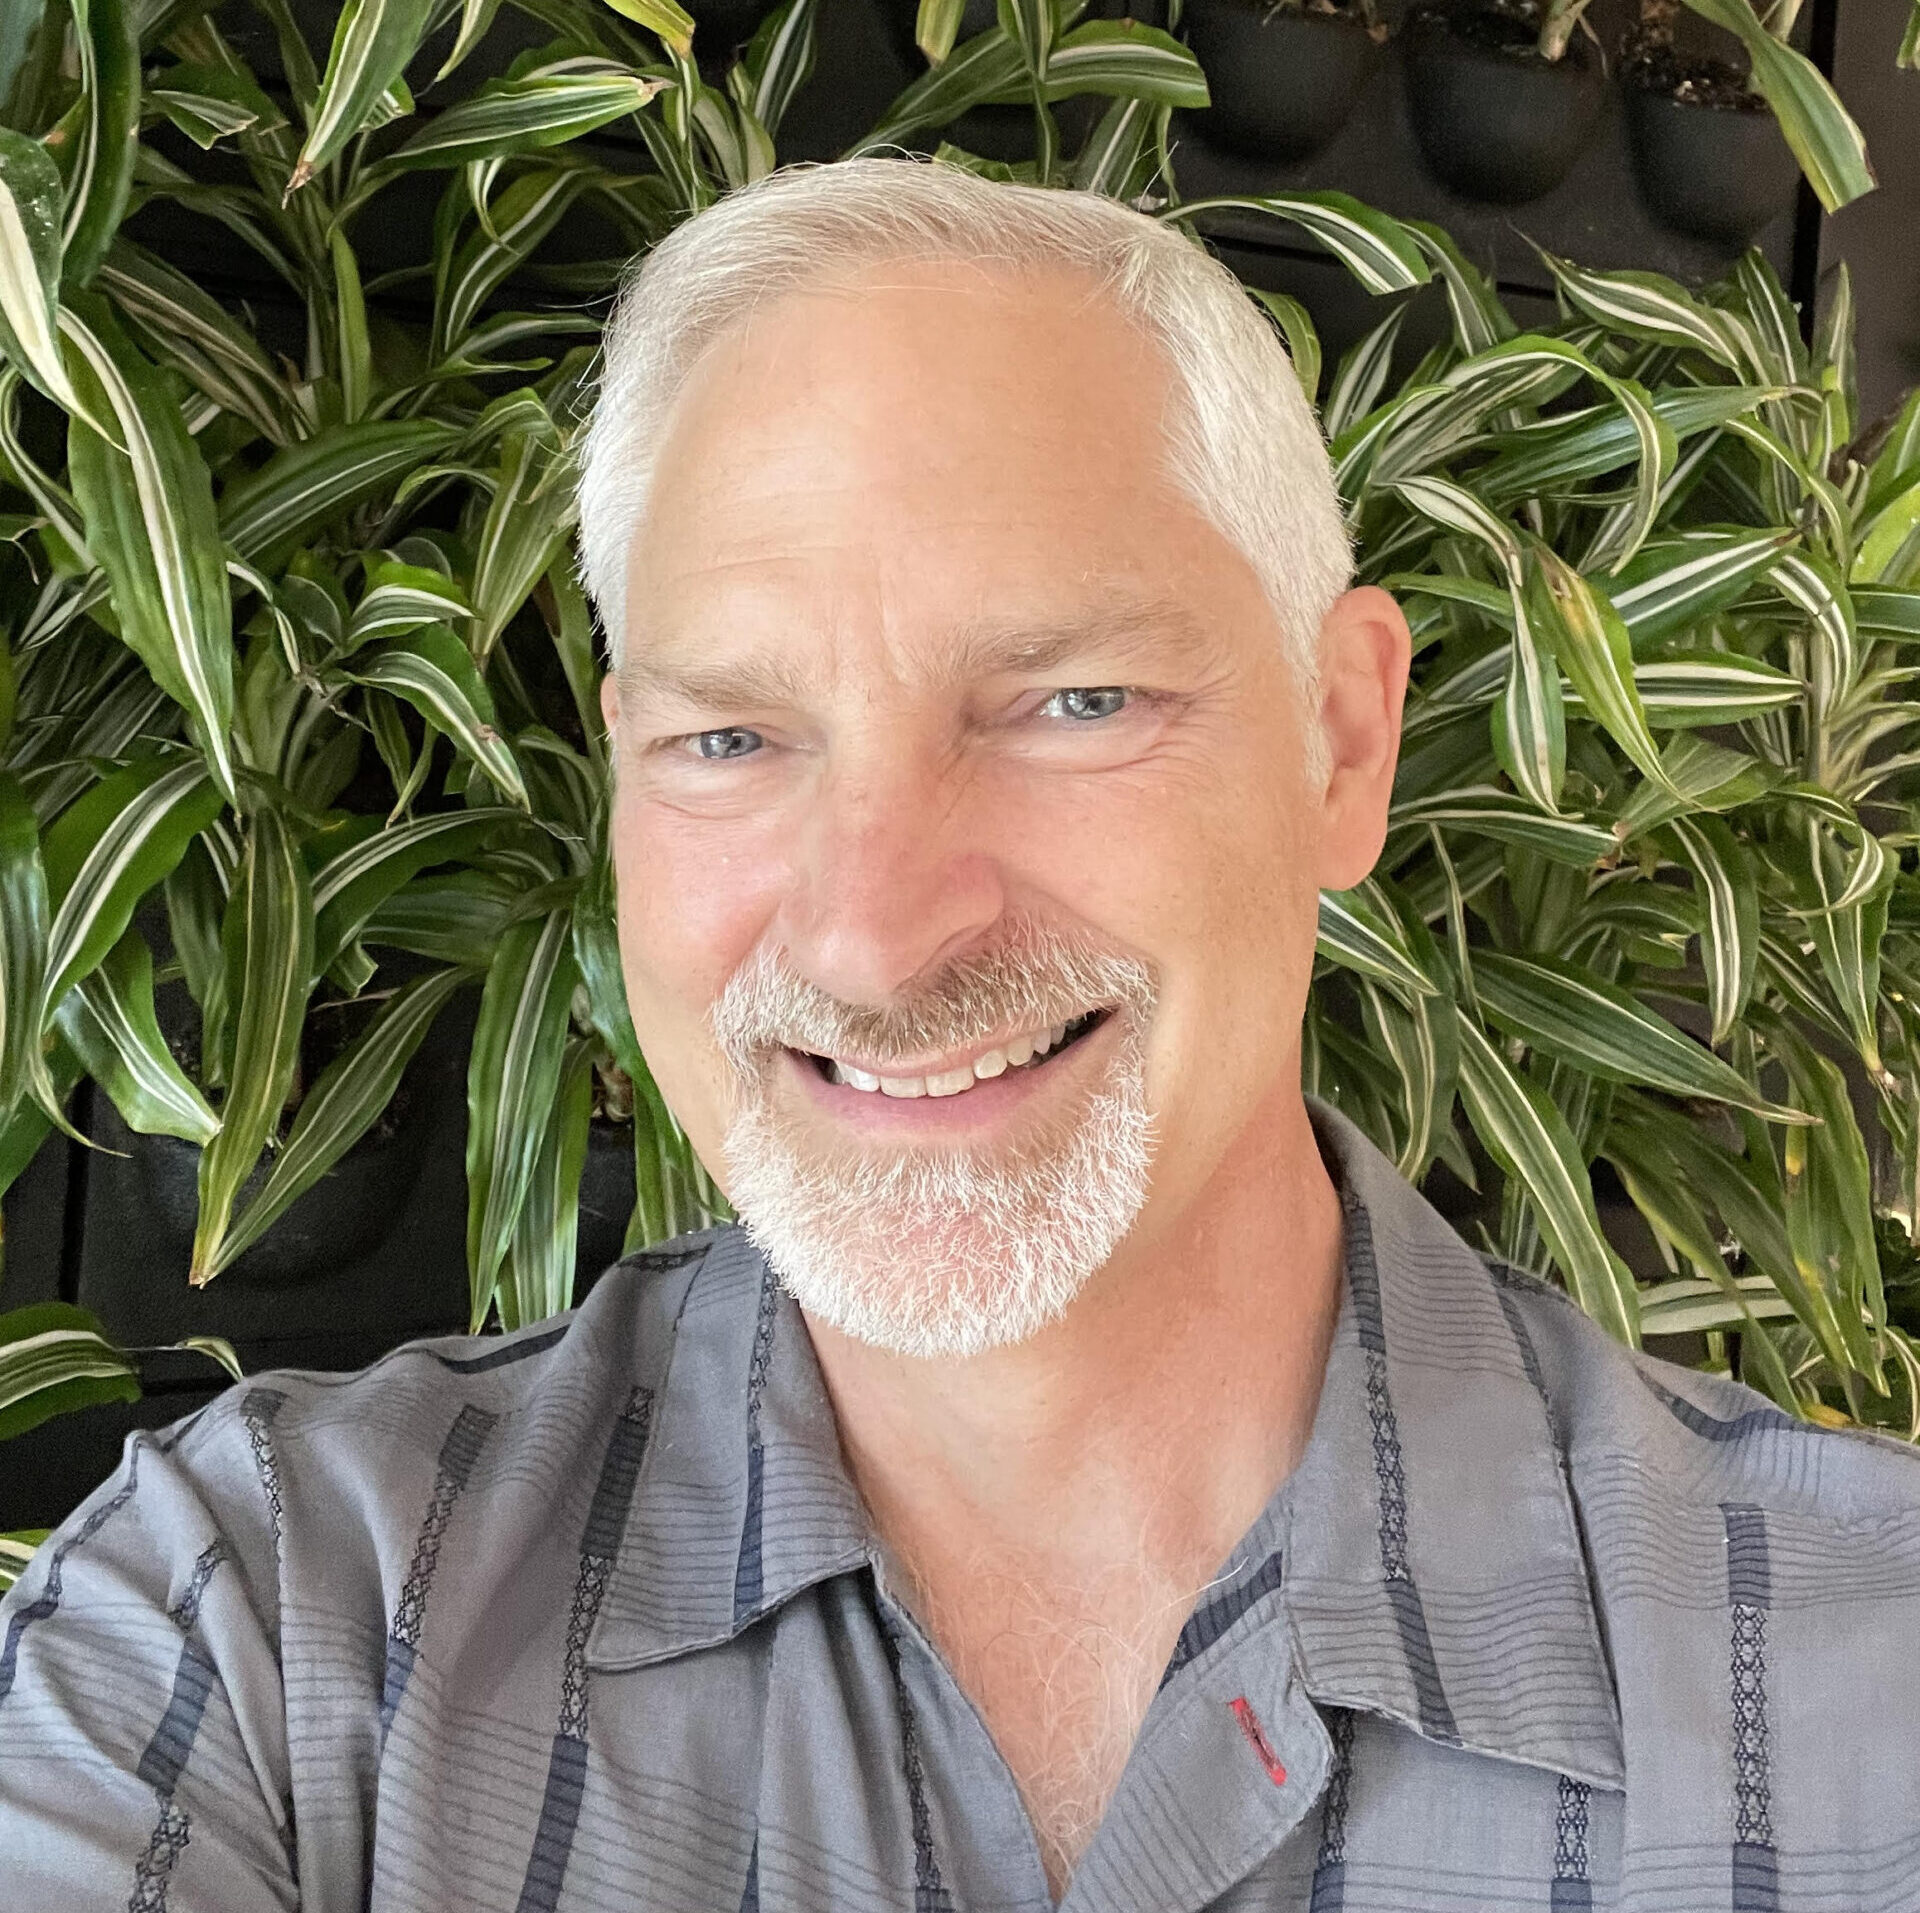 Headshot of Michael Wilker. Michael has short white hair with a bald patch on top, white/grey goatee, blue eyes, and peach white skin. He is smiling, and wearing a grey button down with grey stripes and standing in front of green plants.